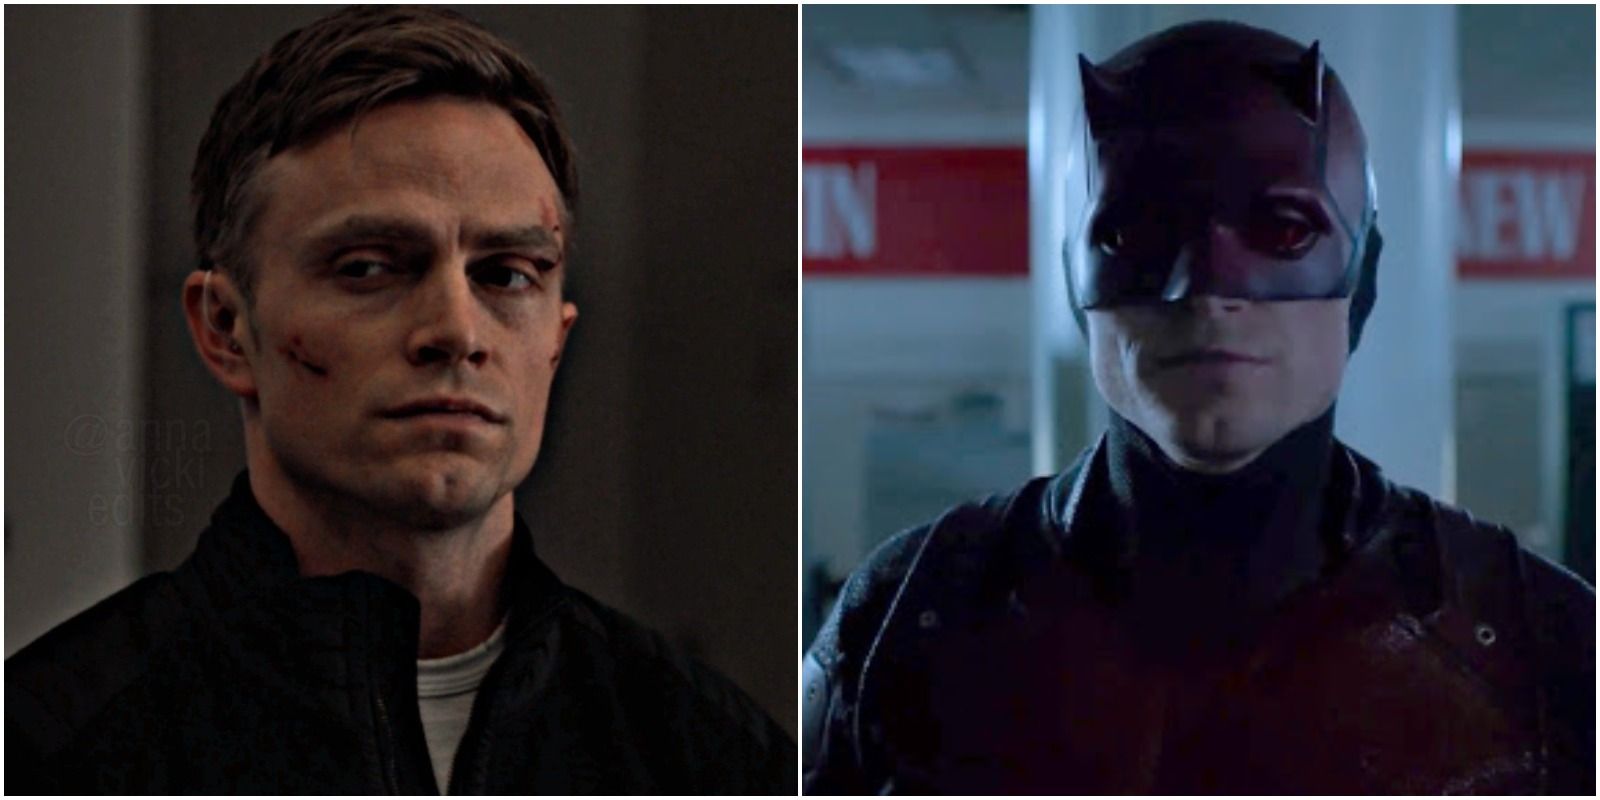 Wilson Bethel as Ben Poindexter/Bullseye out and in the Daredevil suit